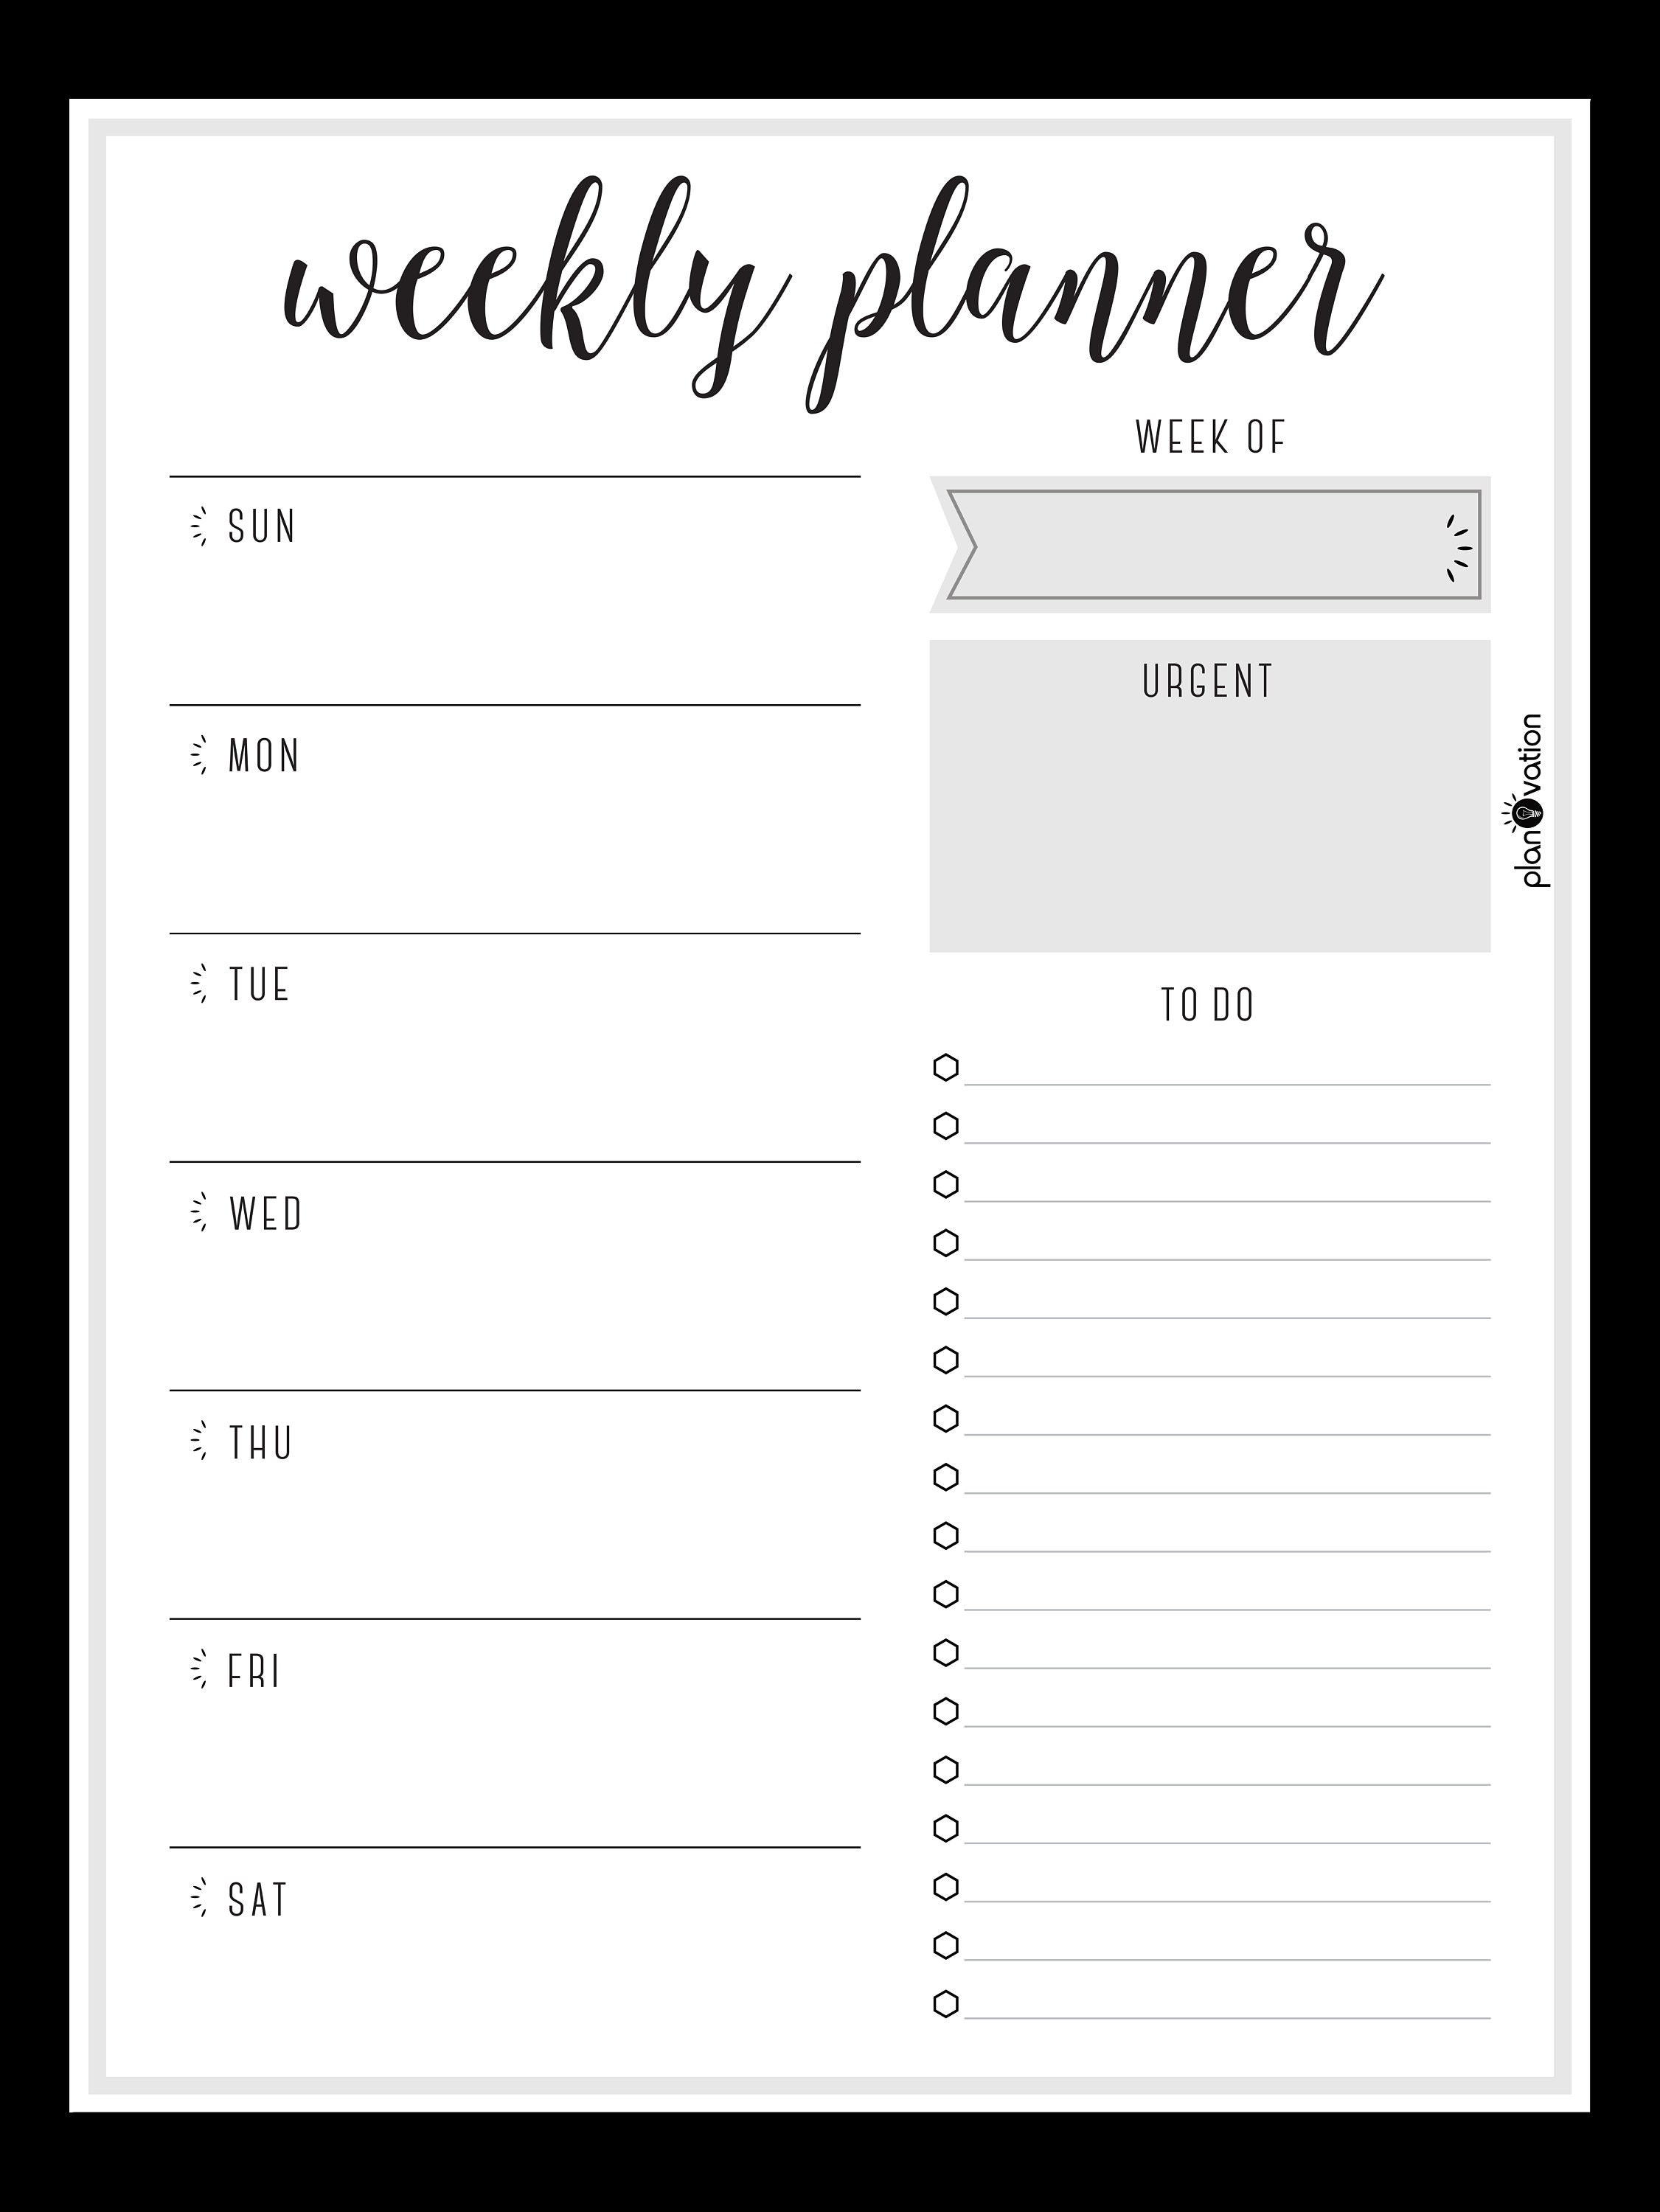 2022 Planner to Do List Weekly Schedule Dry Erase Weekly - Etsy